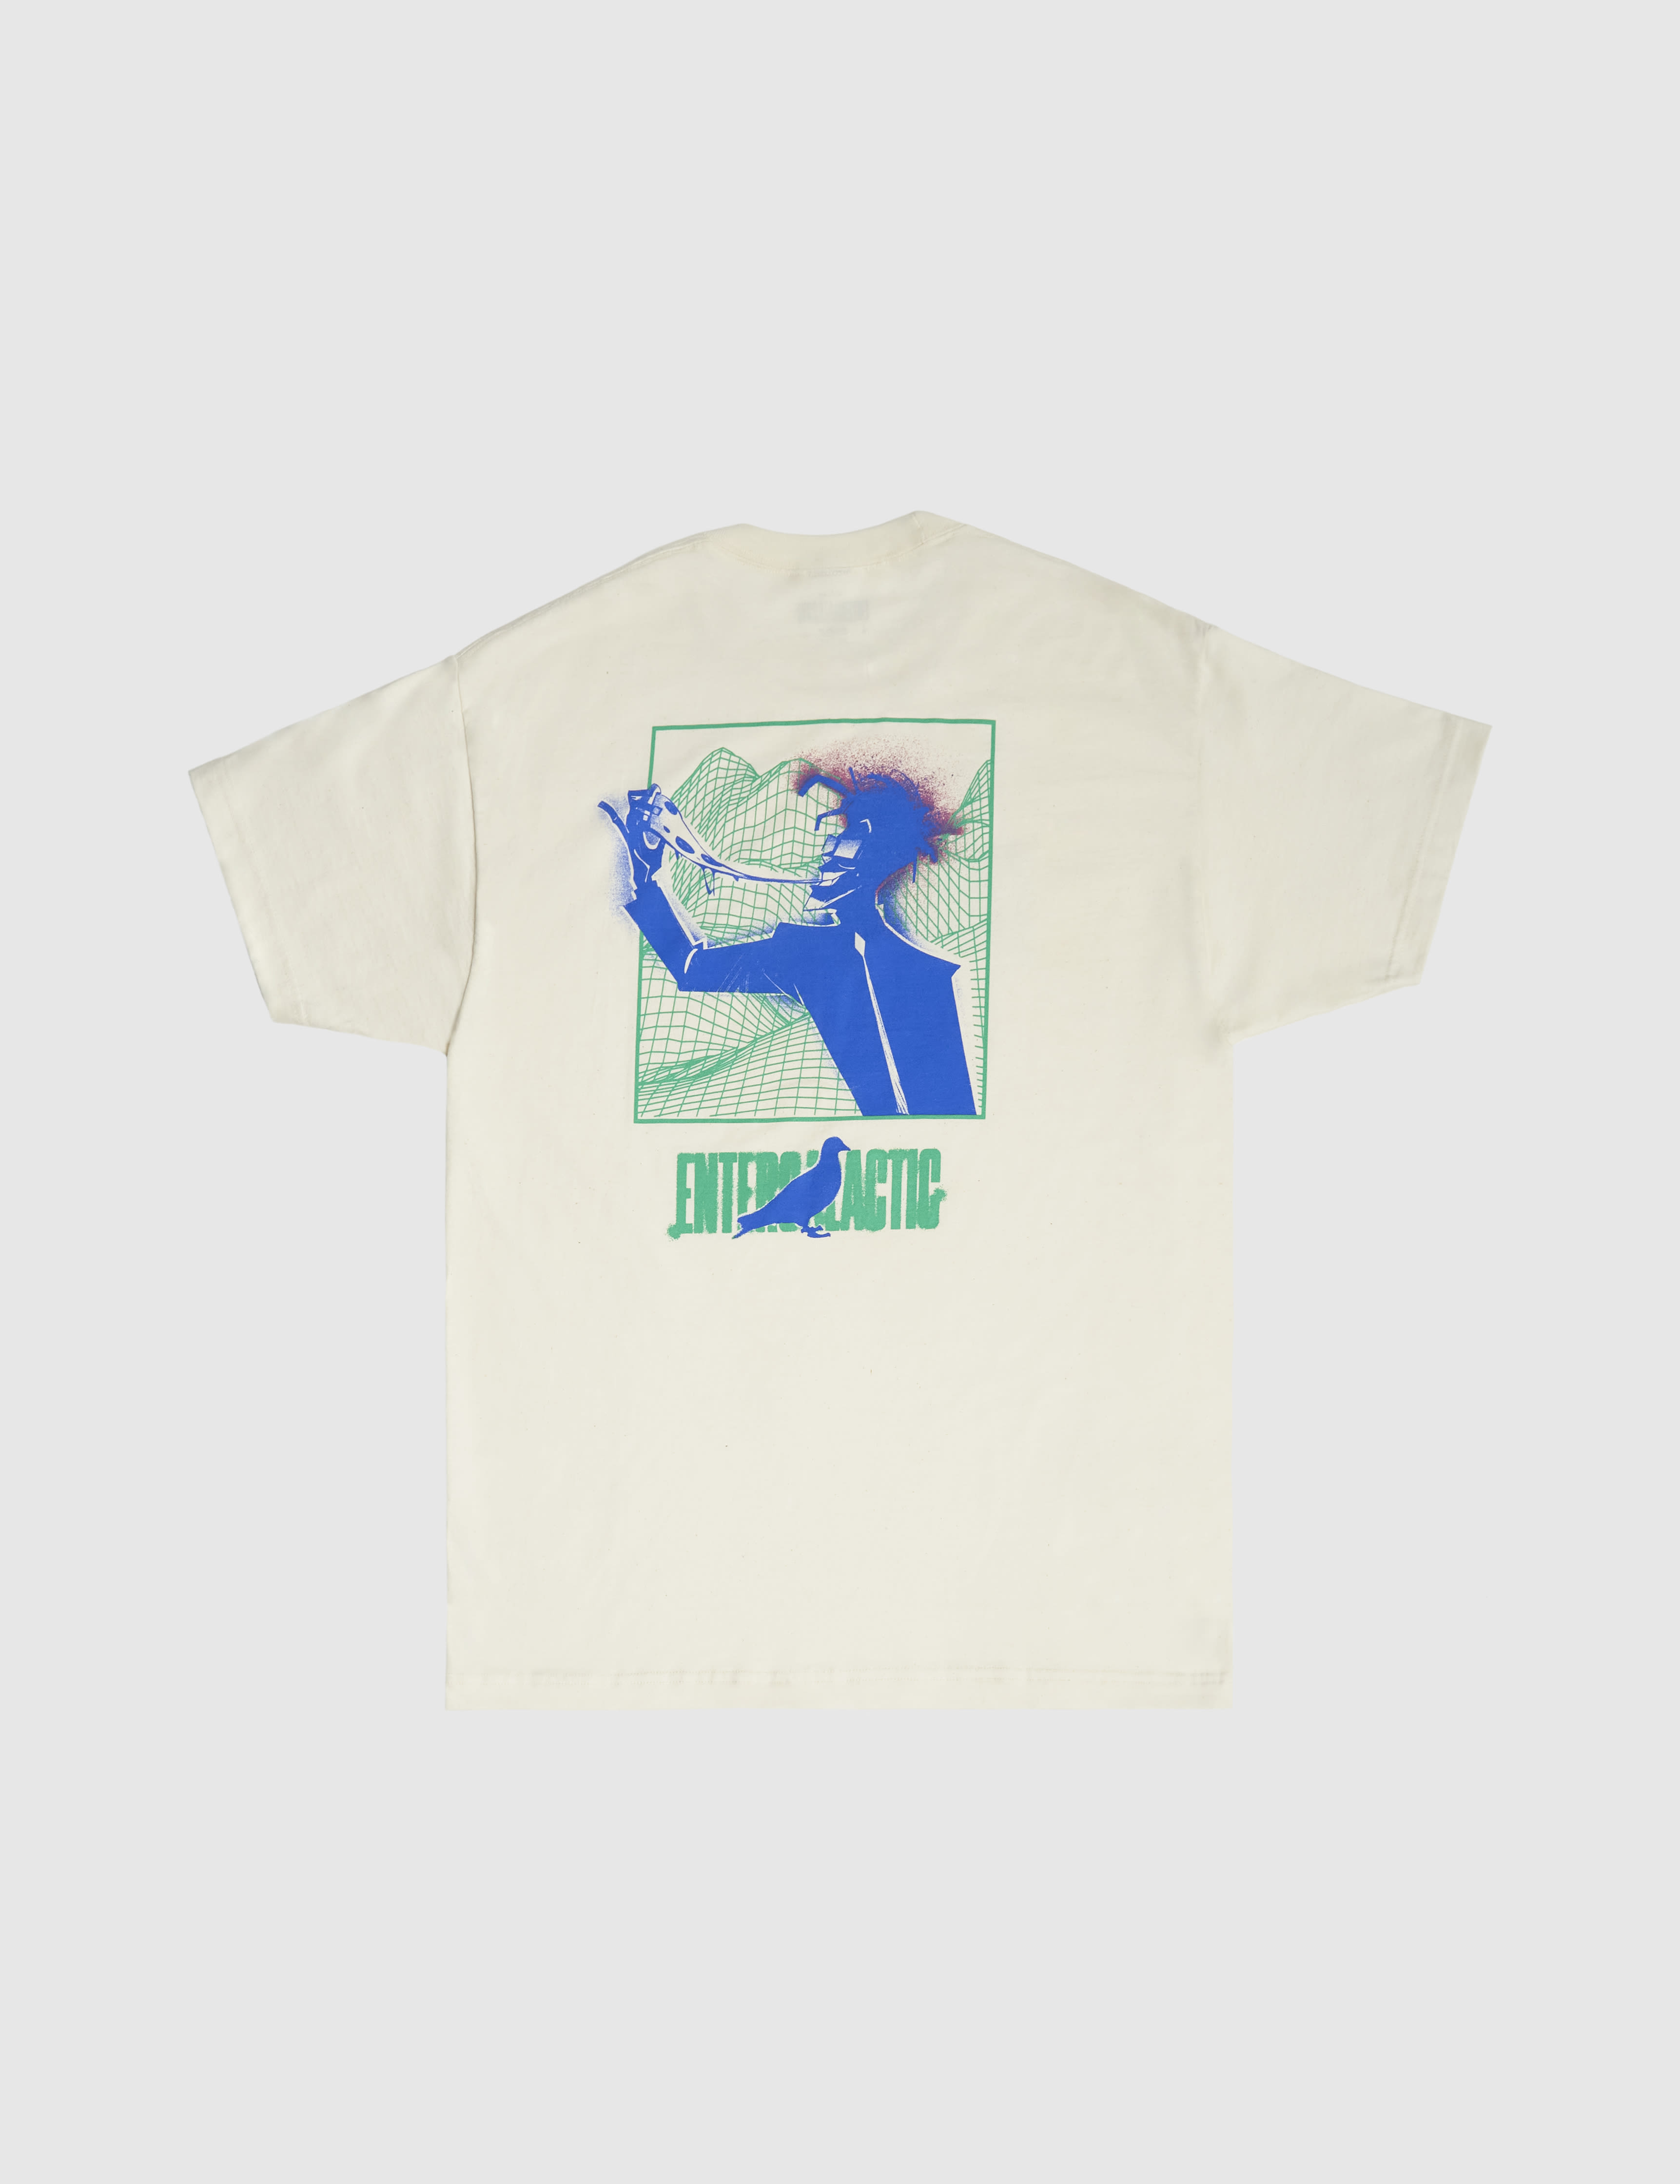 A look at a new shirt from Staple